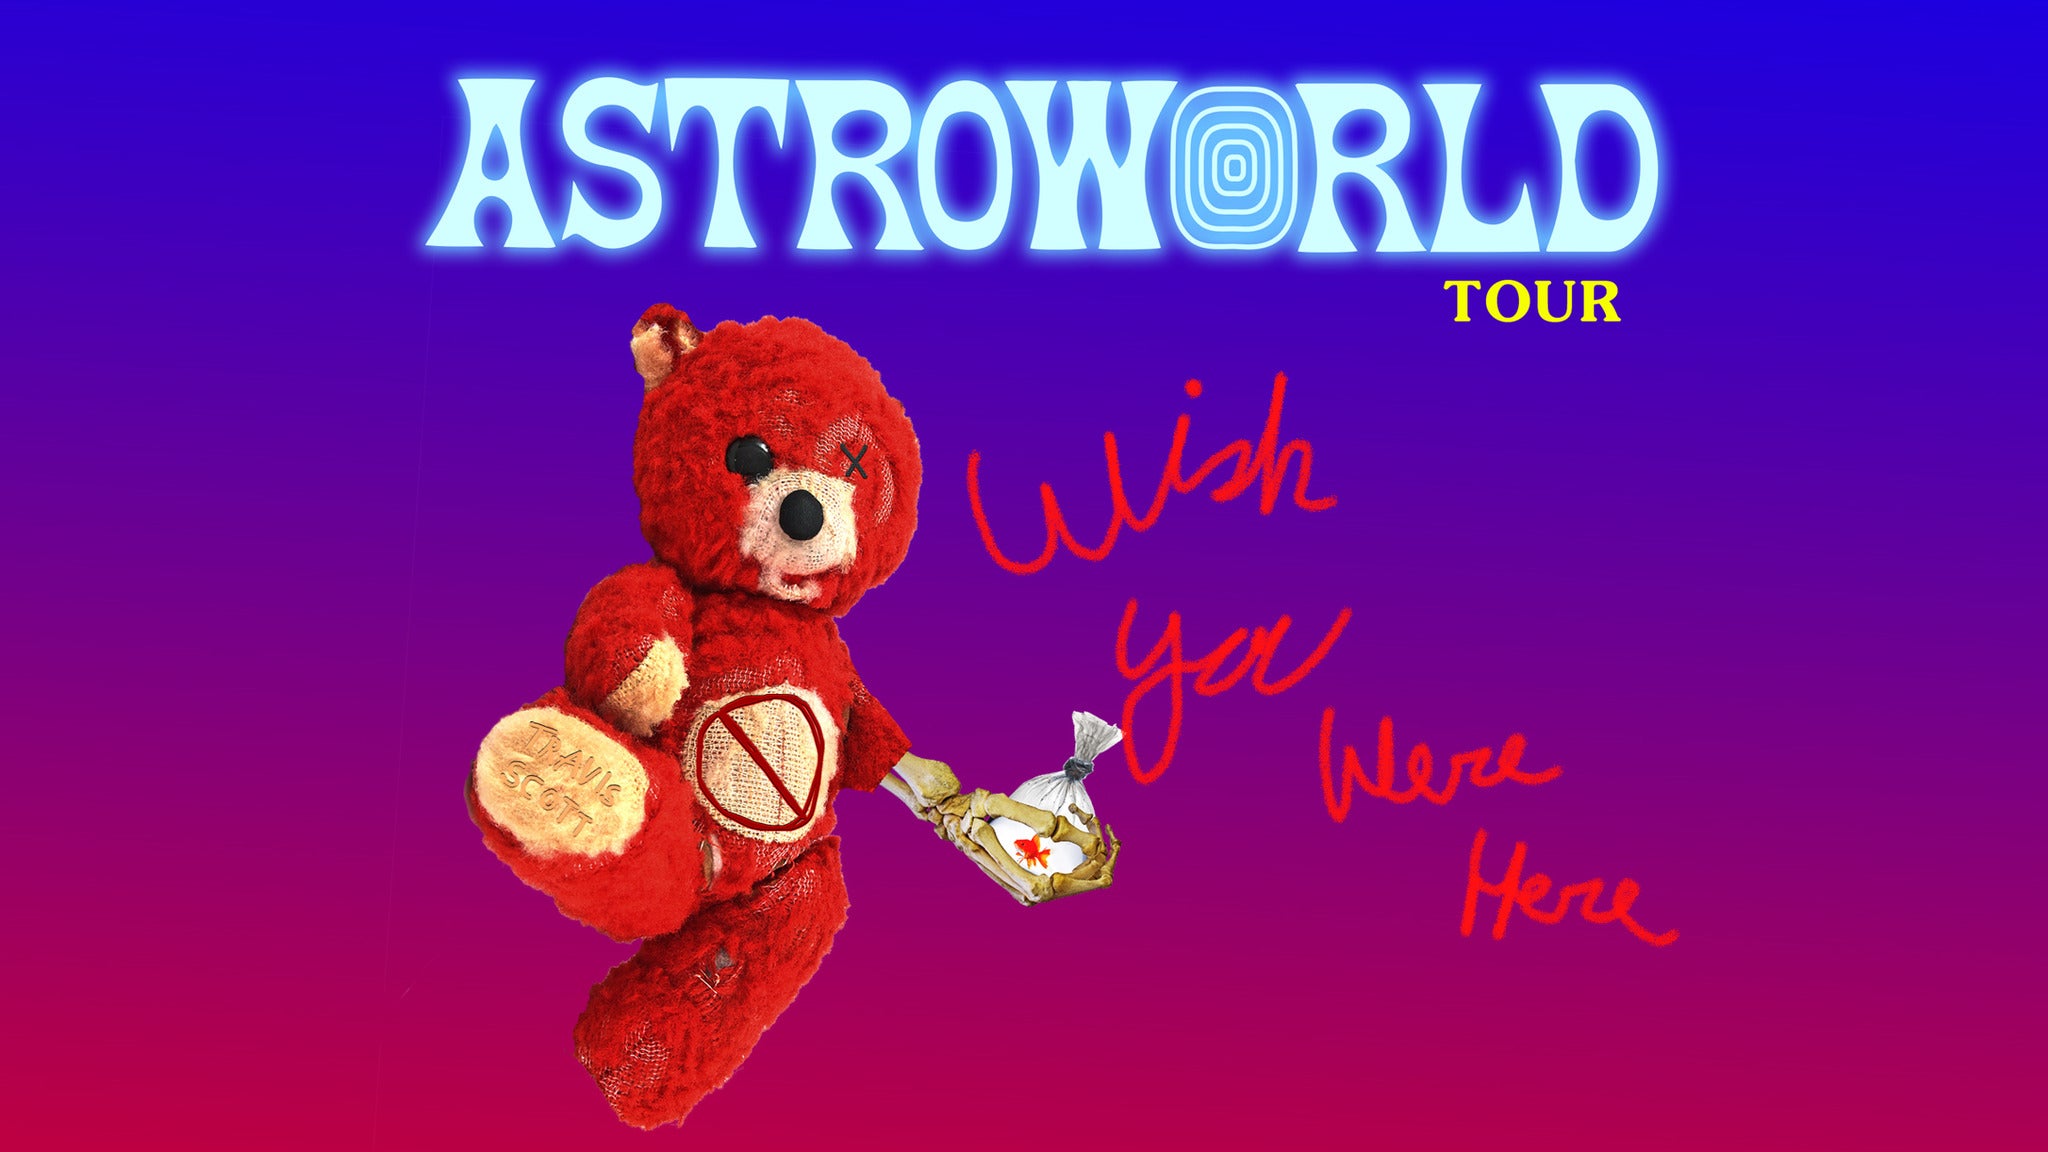 TRAVIS SCOTT - ASTROWORLD: WISH YOU WERE HERE TOUR in Tampa promo photo for Live Nation presale offer code